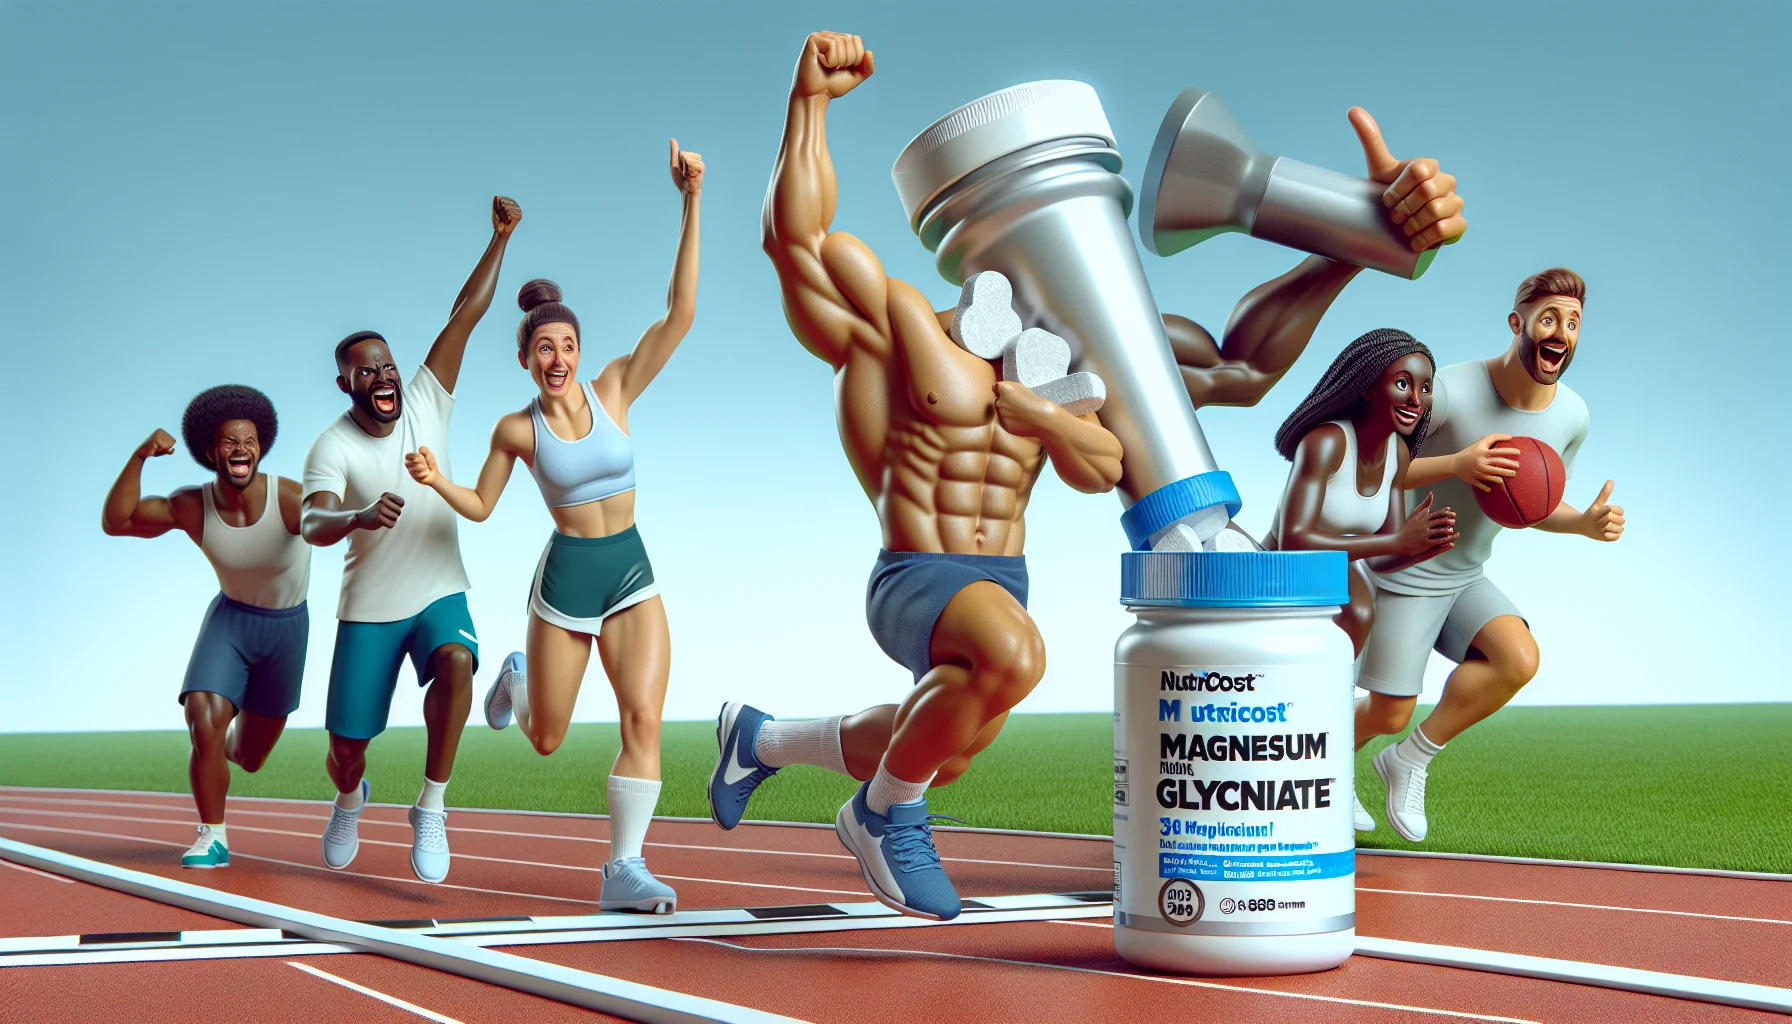 Generate a playful and realistic scenario featuring a bottle of Nutricost Magnesium Glycinate, the supplemental magnesium product, in a humorous context appealing to athletes. A diverse group of sporstpeople, including a Caucasian female tennis player, a Black male football player, and a South Asian female golfer, are depicted giving a thumbs-up to the product or acting excited about it. The product is depicted as if it has just won a race against other generic sports supplements, crossing a finish line with cartoon-like arms and legs, showing its effectiveness in sports nutrition.